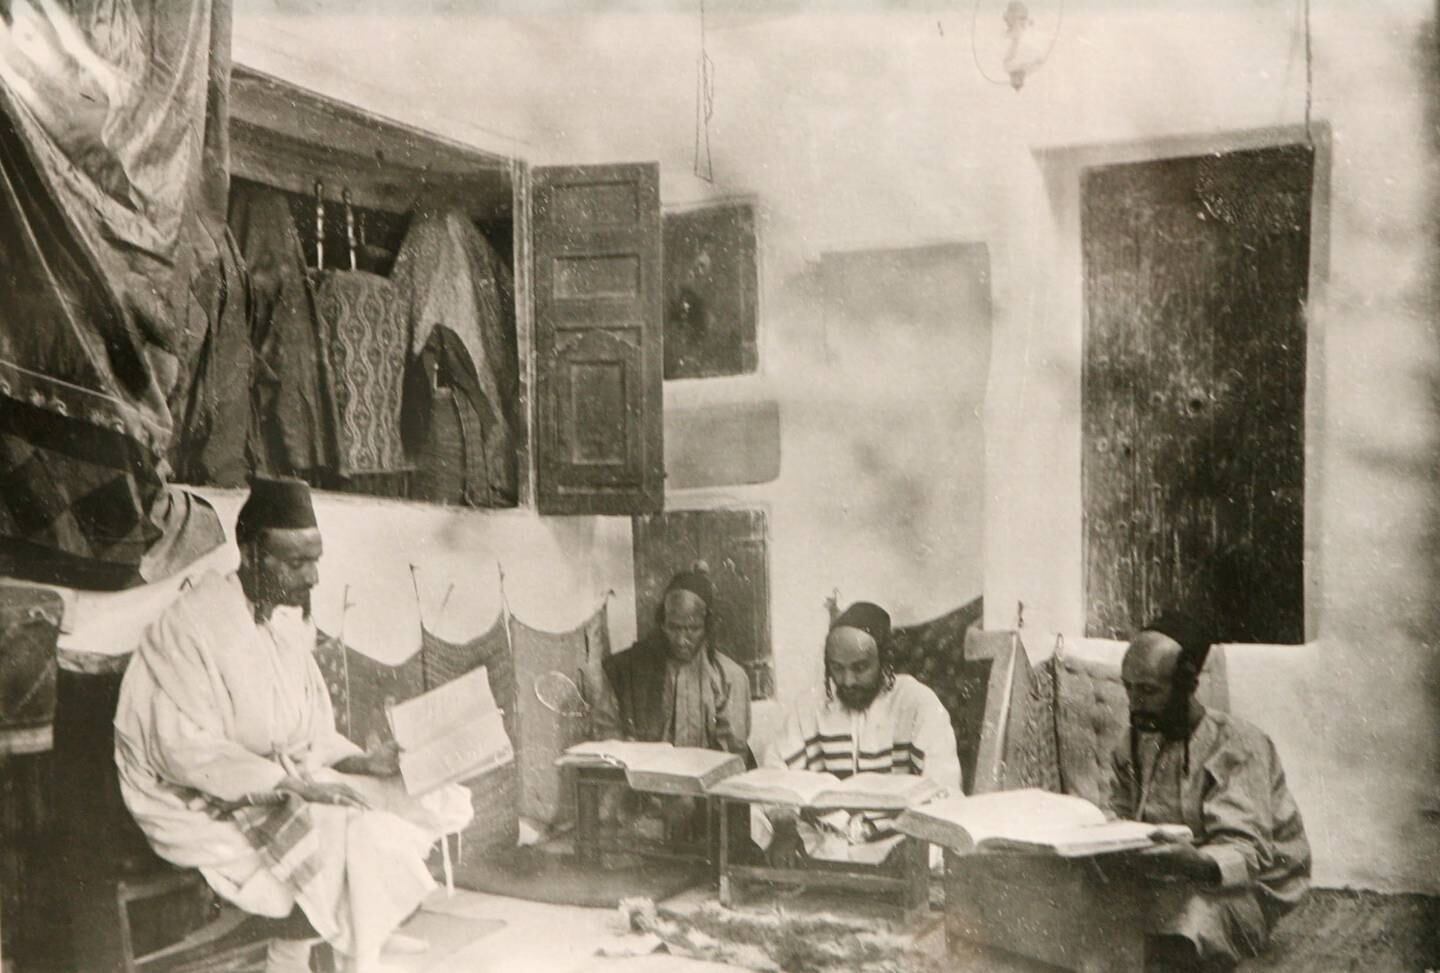 Abu Dhabi, UAE - May 18, 2009 - Jews studying the Torah in a synagogue, 1907. Part of Zayed University exhibit of historical photographs. (Nicole Hill / The National) *** Local Caption ***  NH Zayed06.jpgNH Zayed06.jpgNH Zayed06.jpg